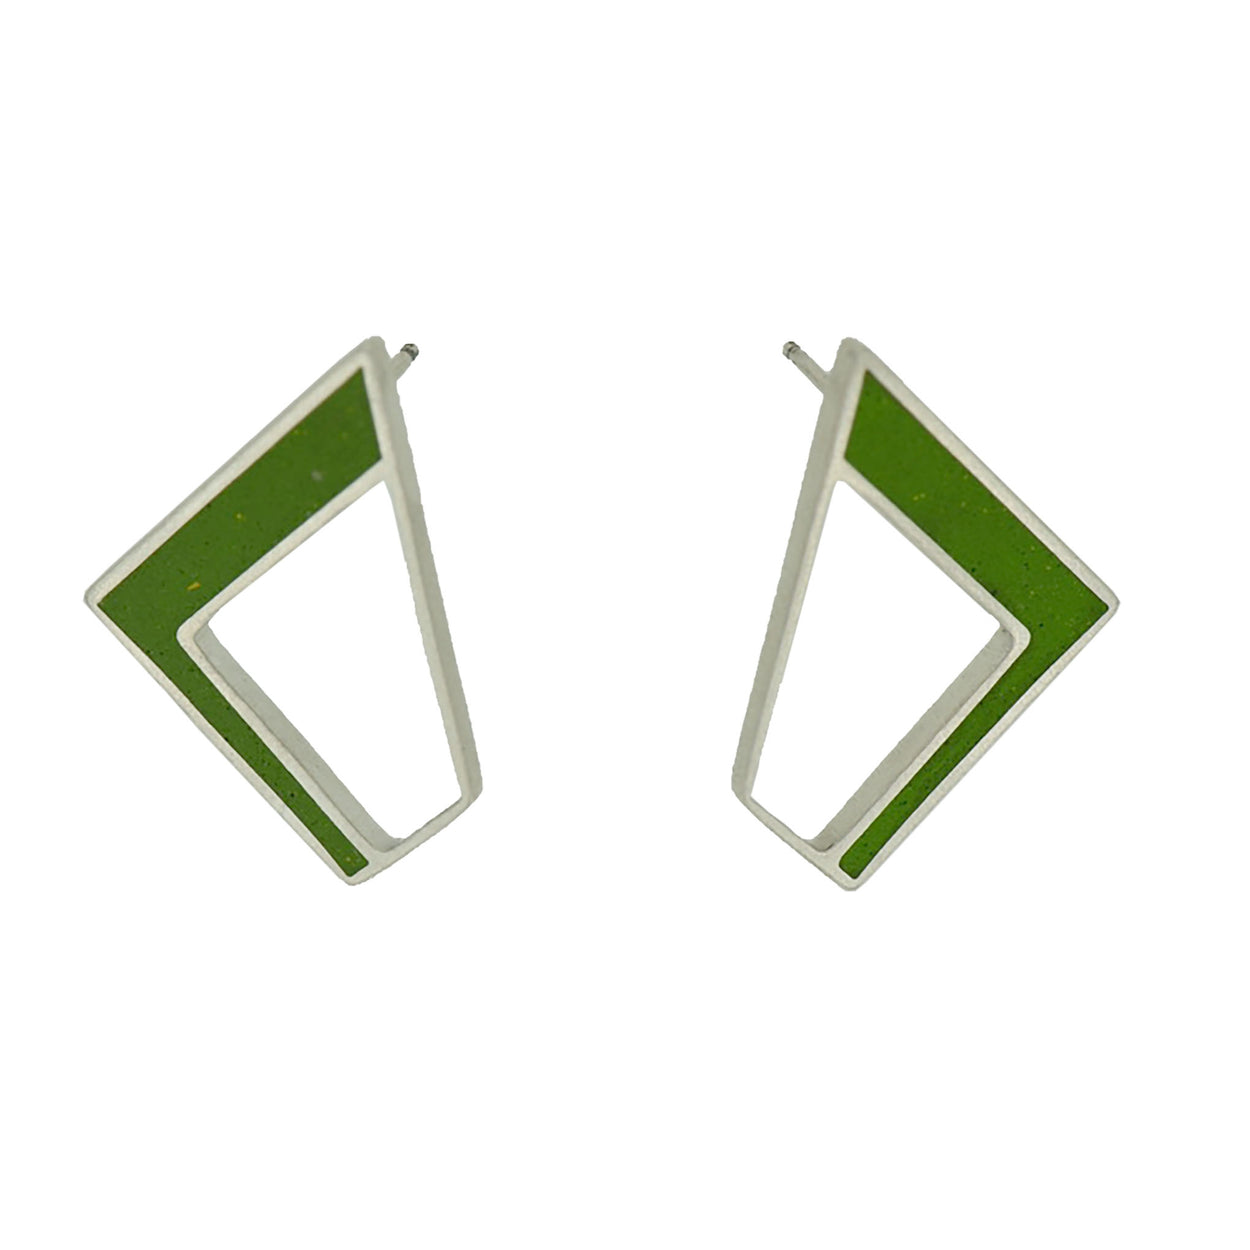 Not Round Earrings SILVER + CONCRETE Lime Green